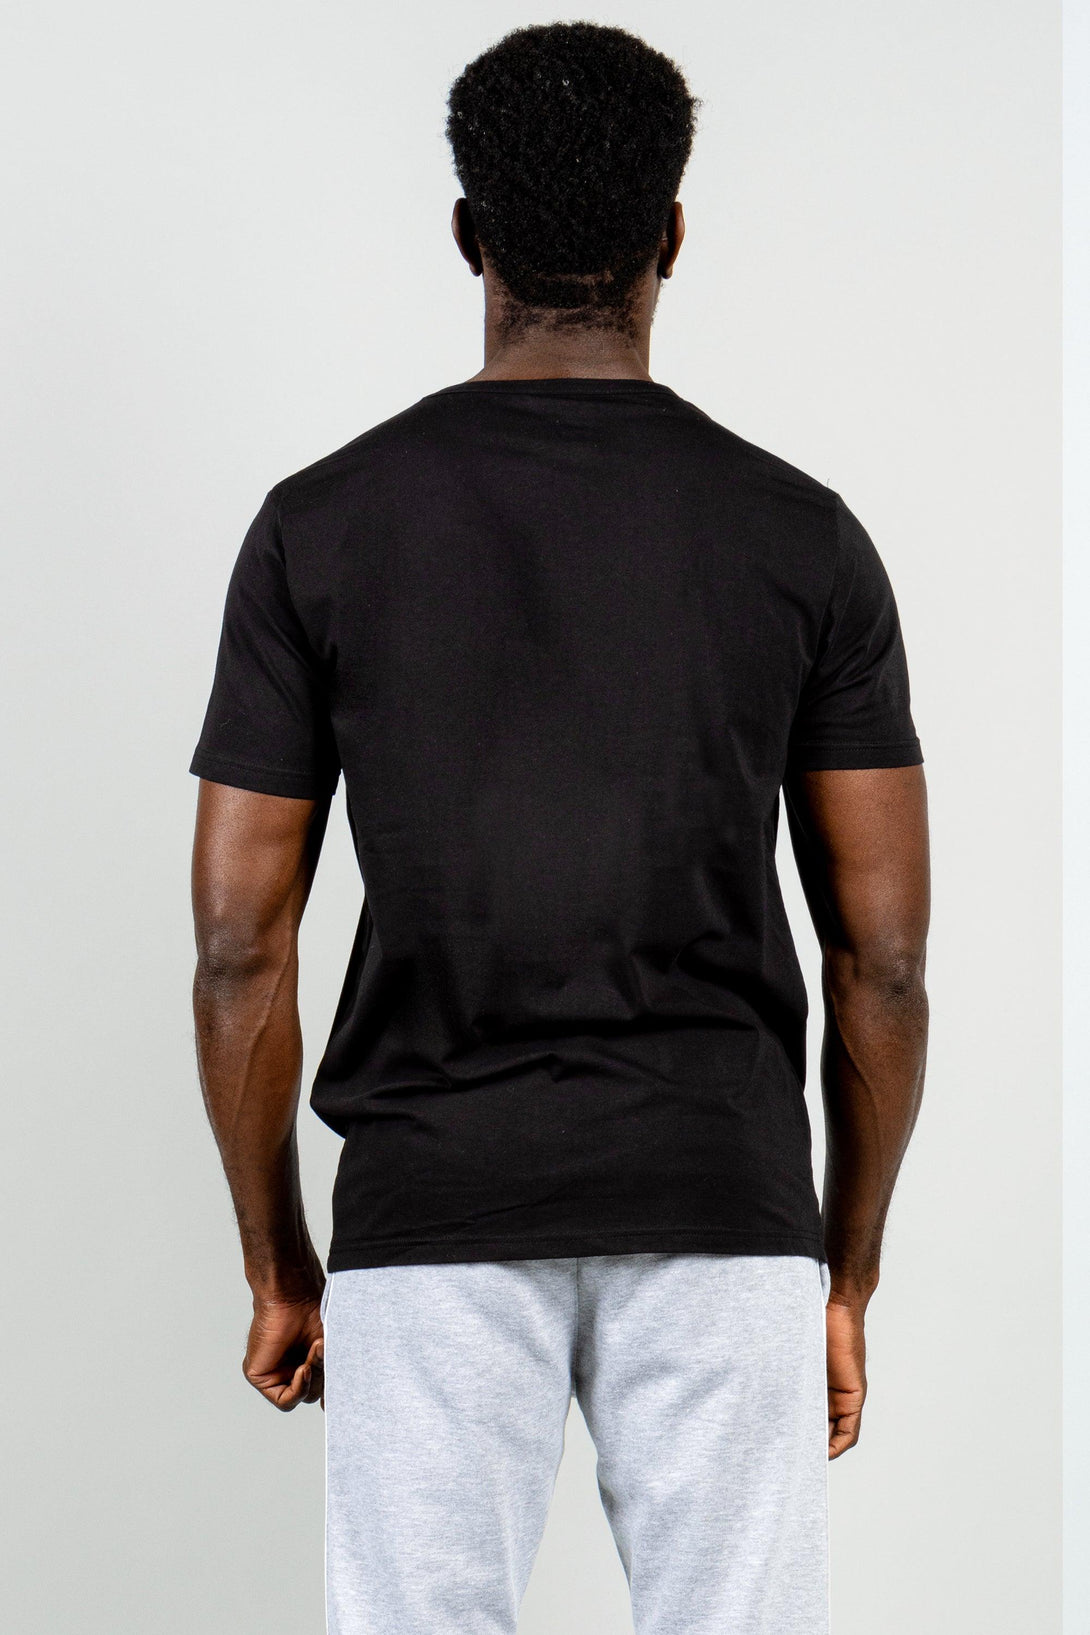 Round Neck T-Shirts | CHARCOAL - WHITE - BLACK - Pack of 6 - FTS